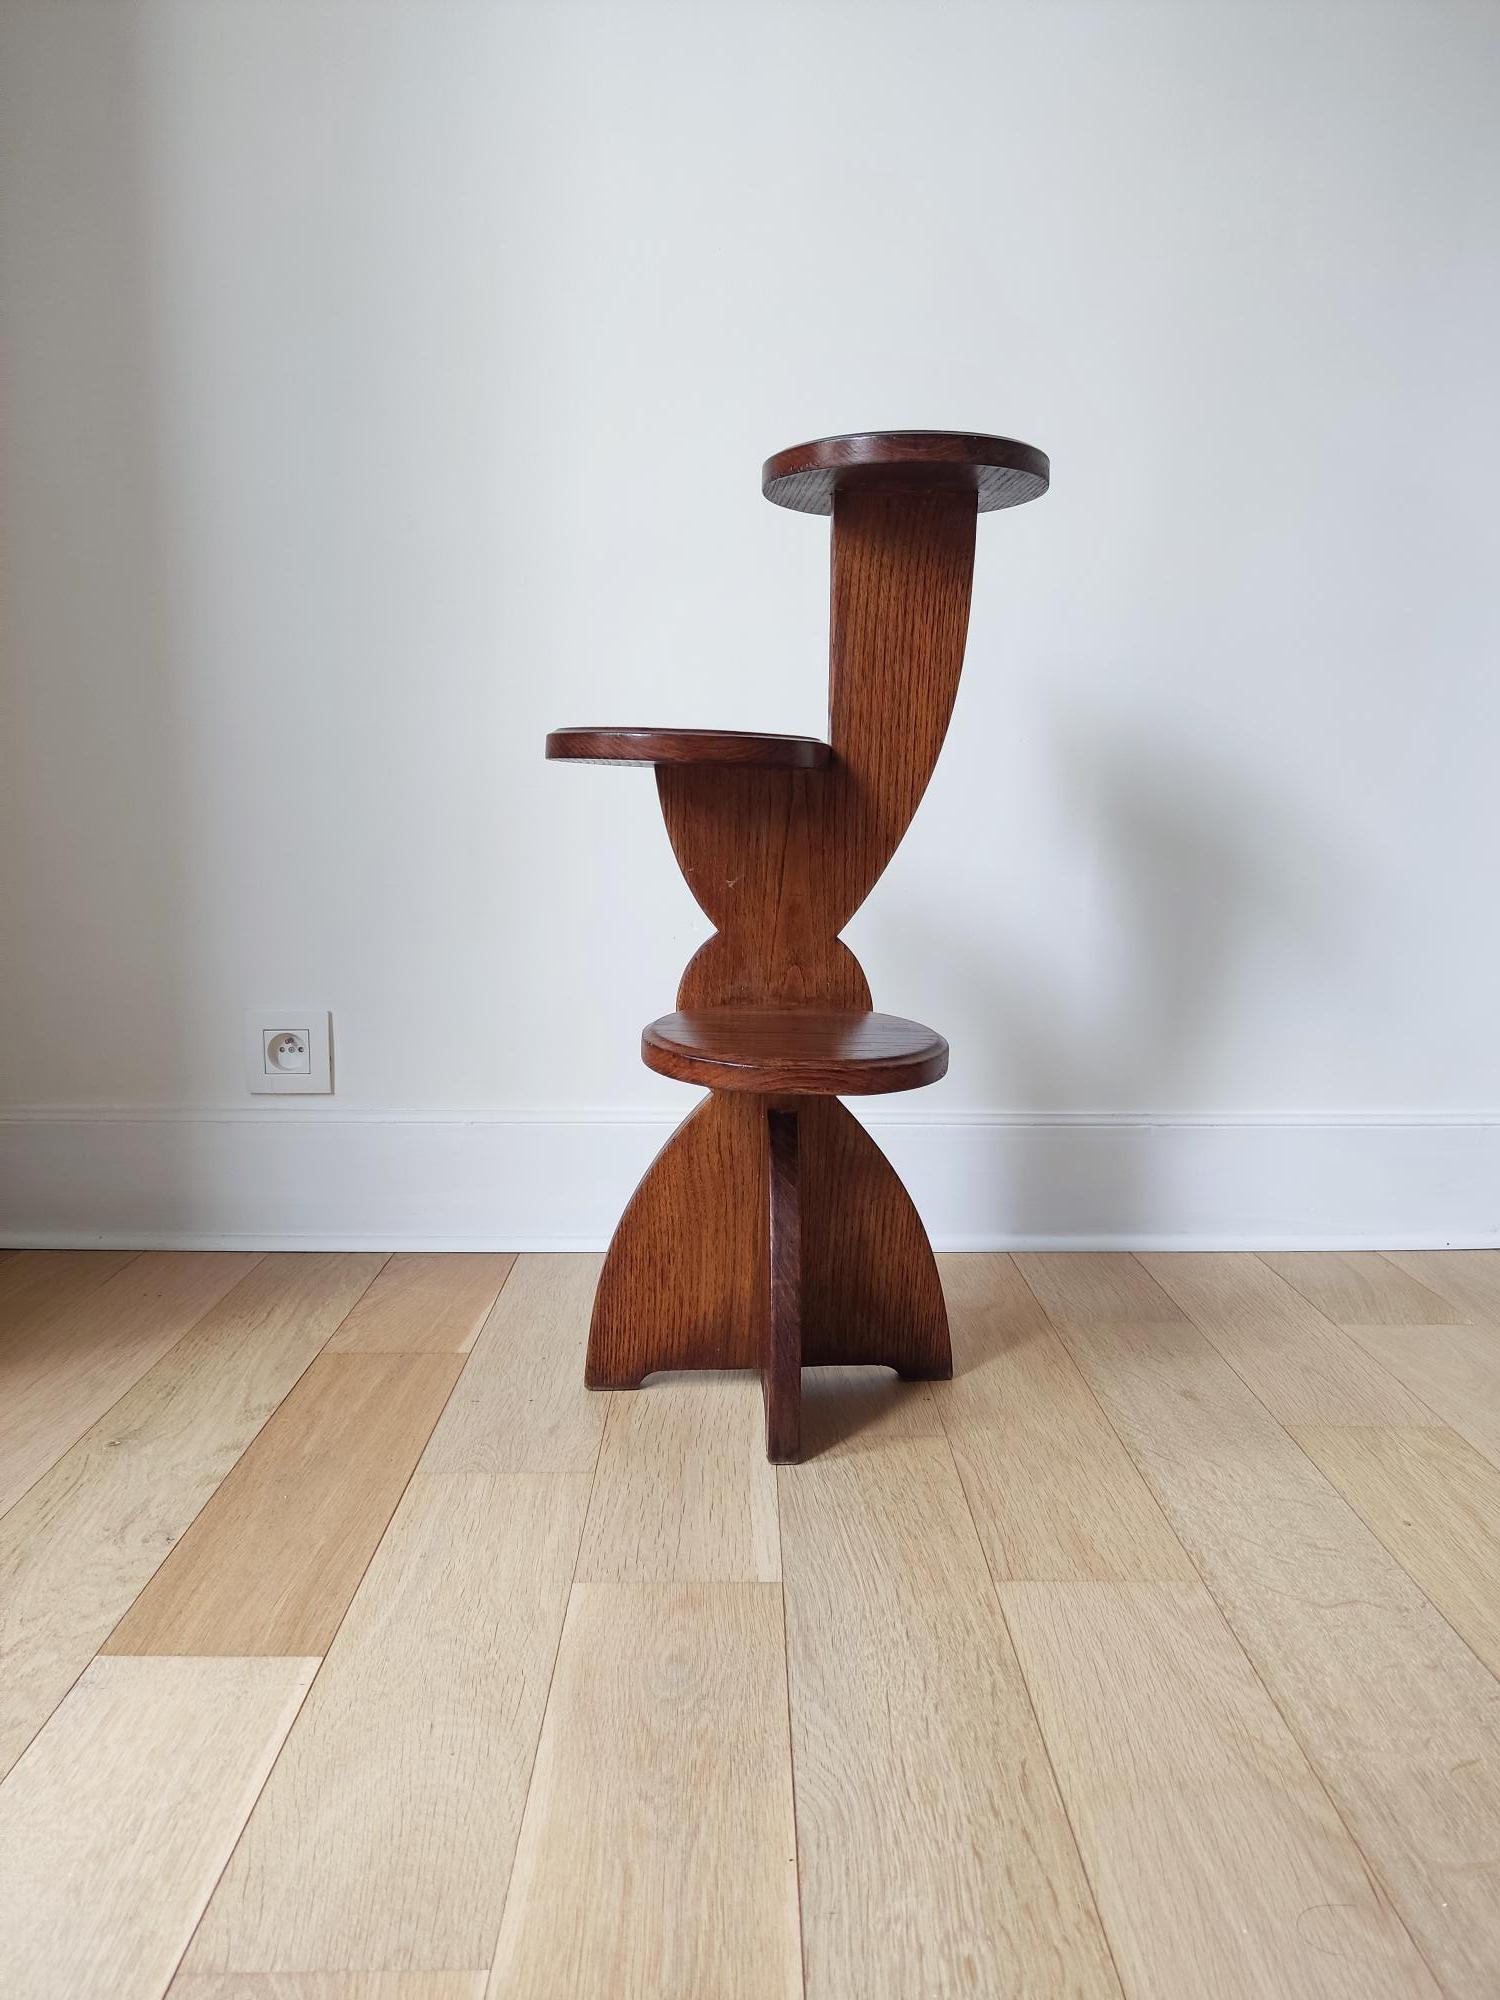 Nice piece of wooden decoration. 70s style with rounded shapes that can be found in Picasso's paintings.
This piece of furniture can be used as a book and coffee rest or to place a lamp.

